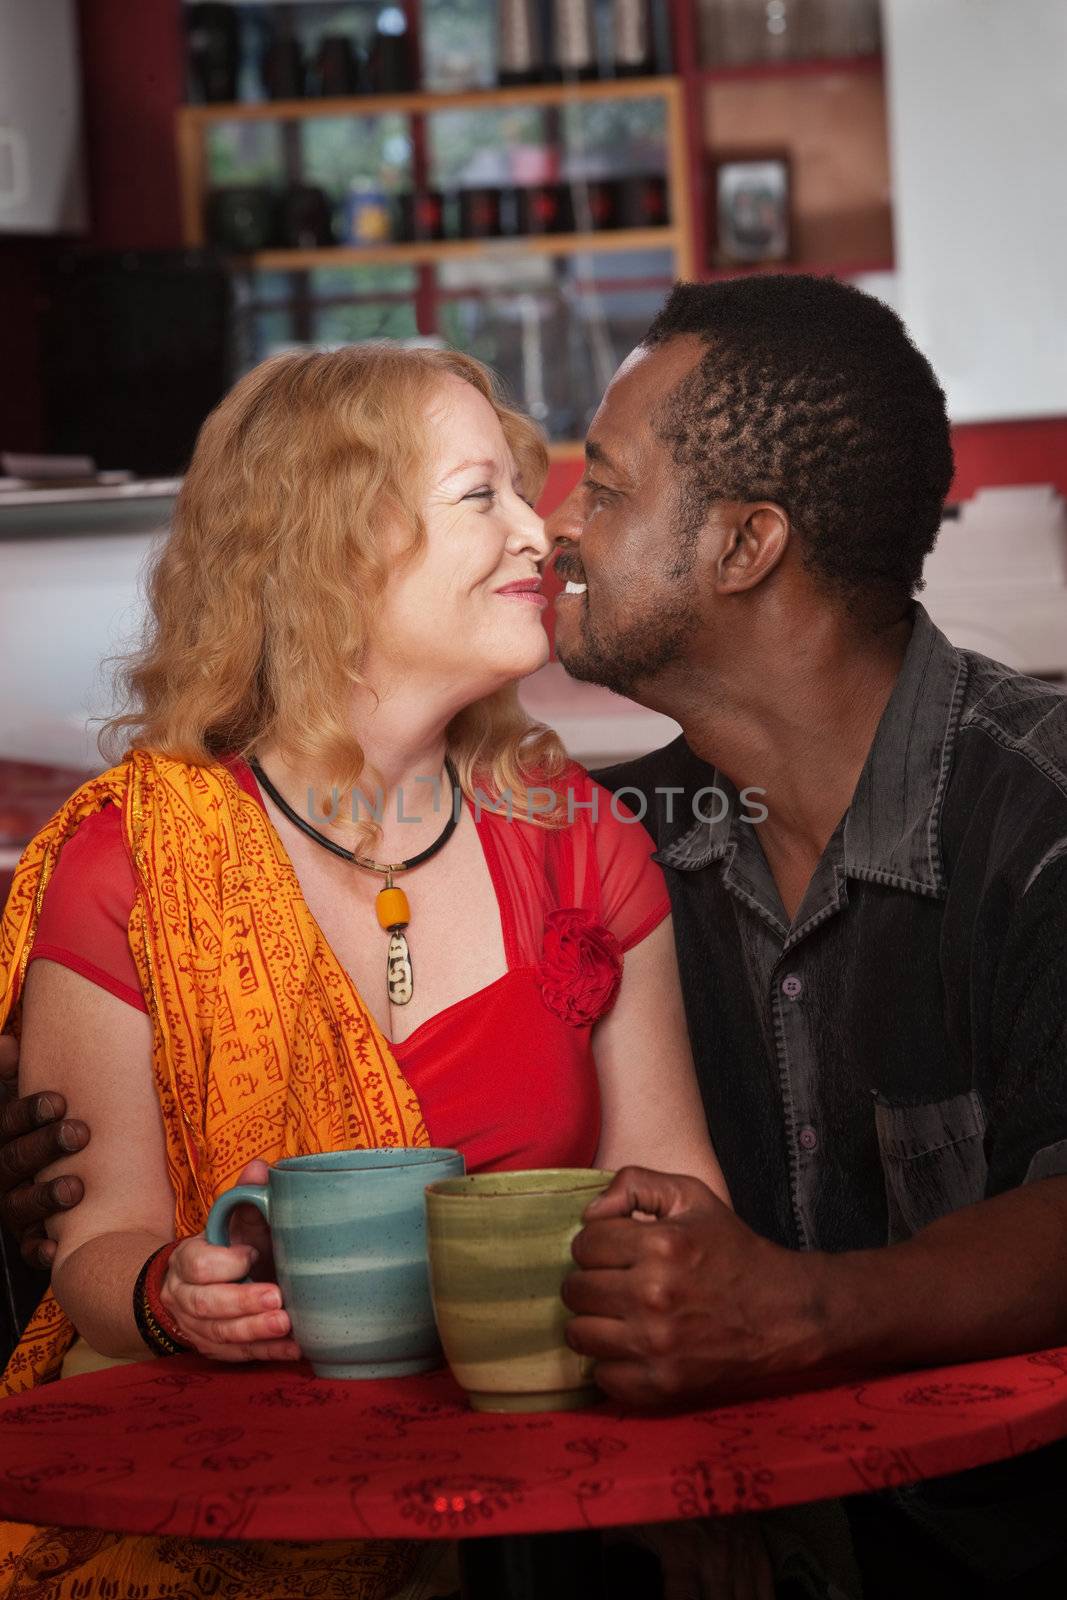 Mixed middle aged couple do an Eskimo Kiss in cafe